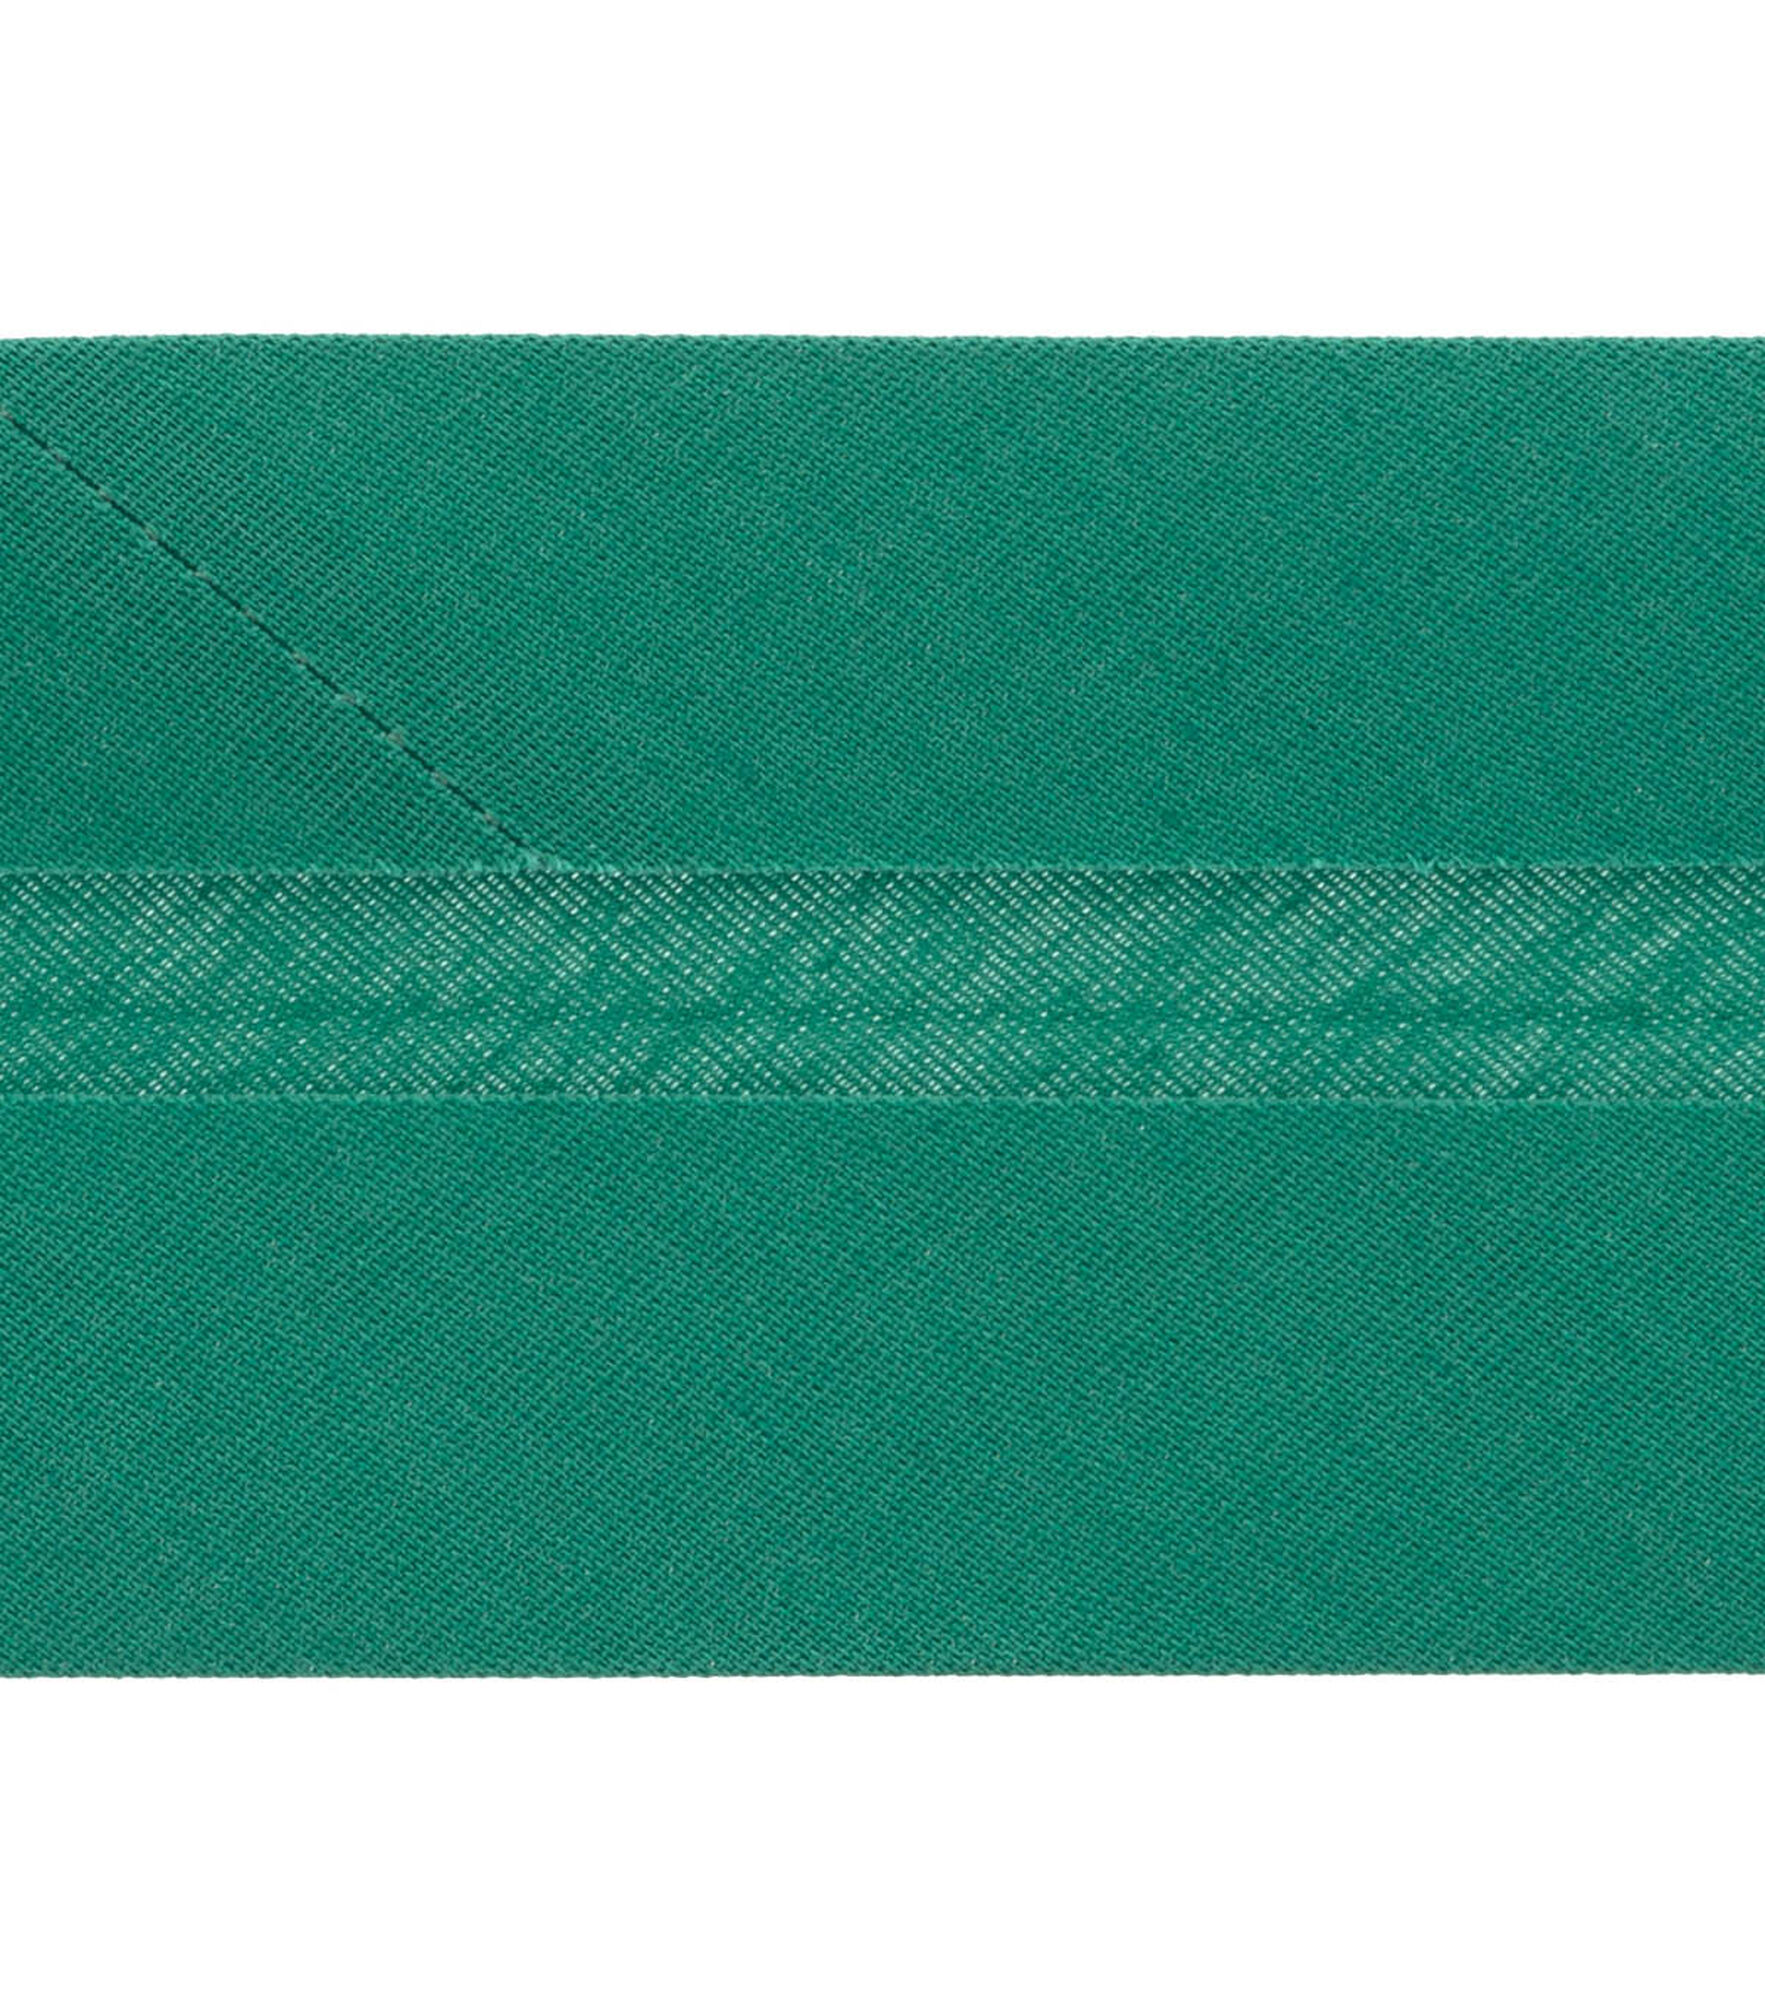 Wrights 7/8" x 3yd Double Fold Quilt Binding, Irish Clover, hi-res